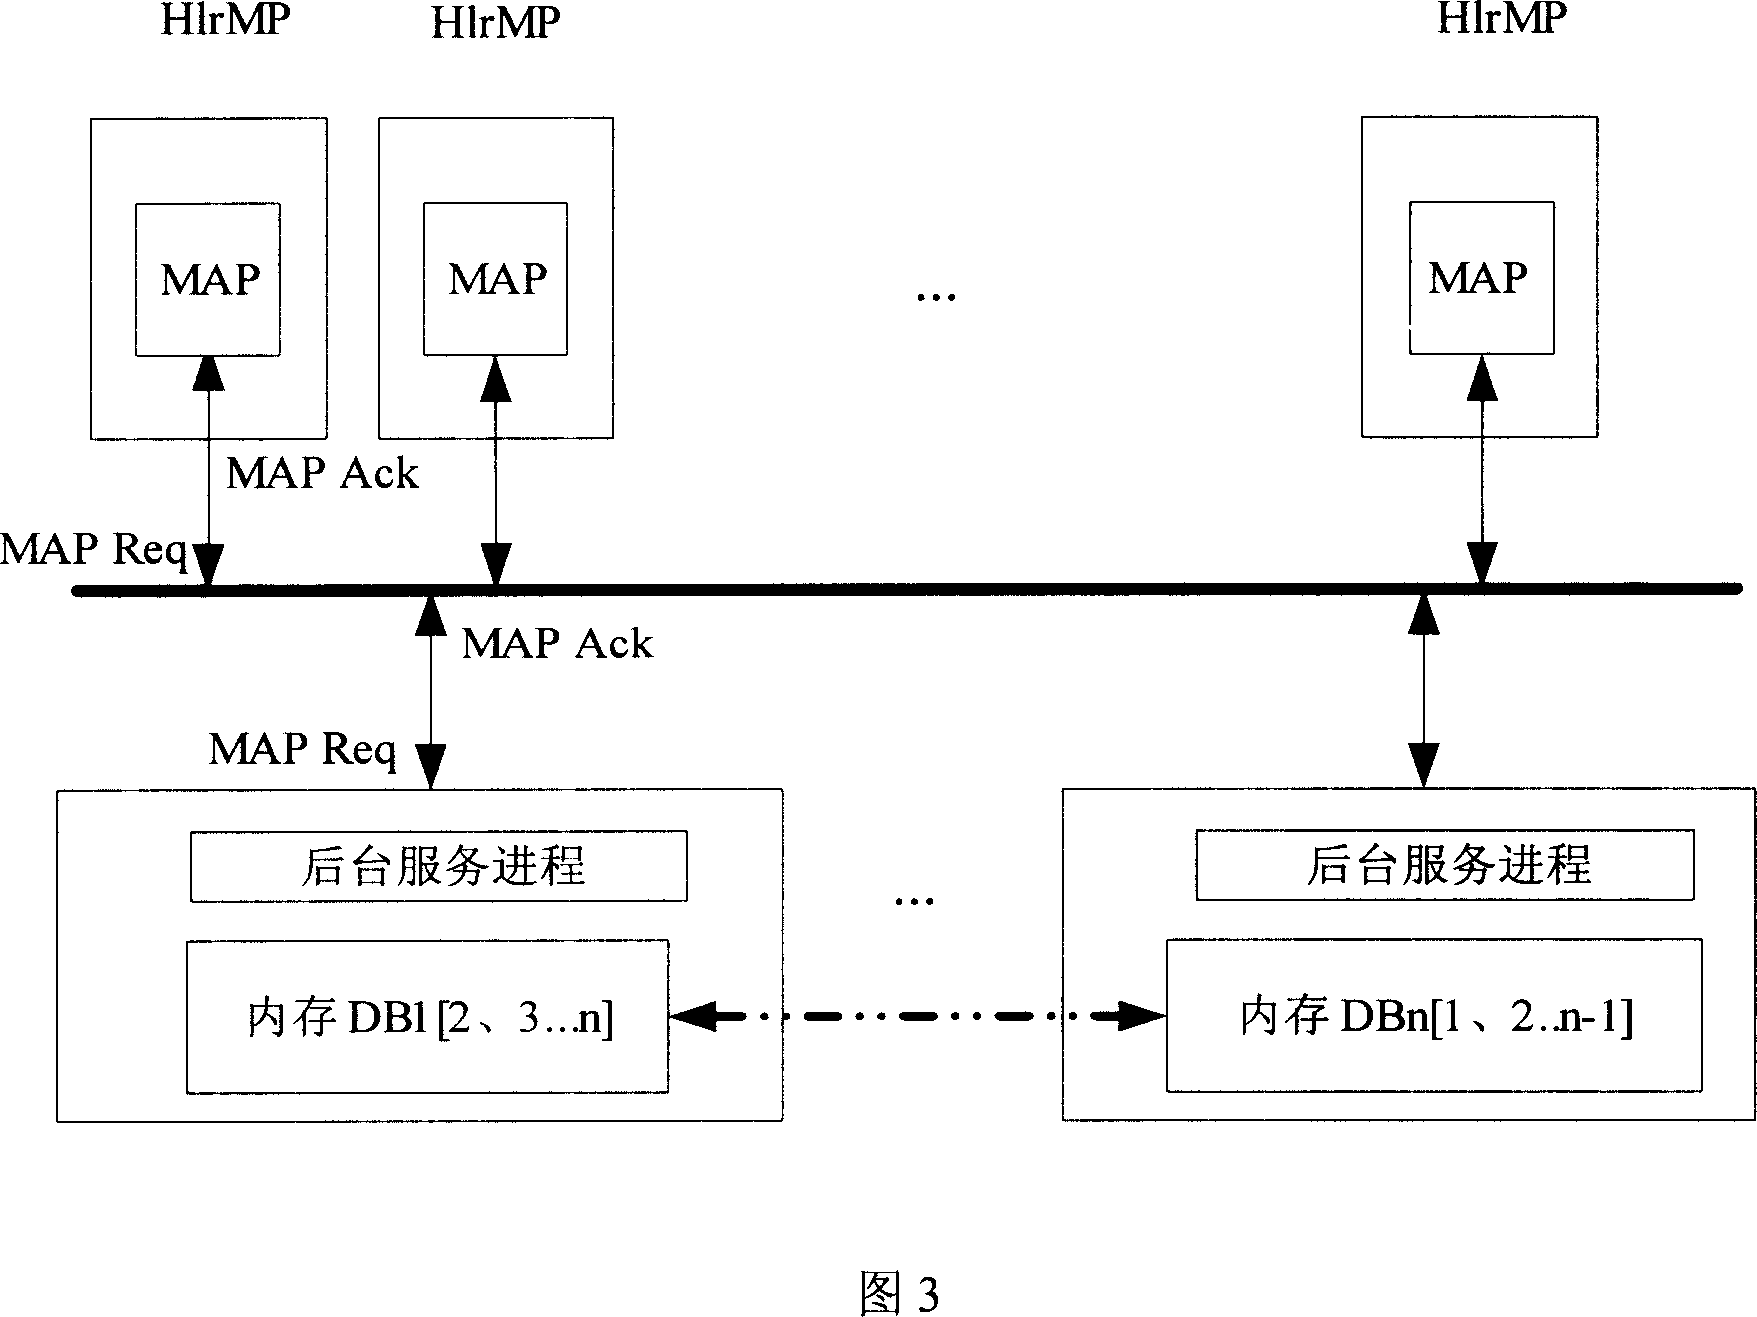 Method for implementing distributed HLR memory database